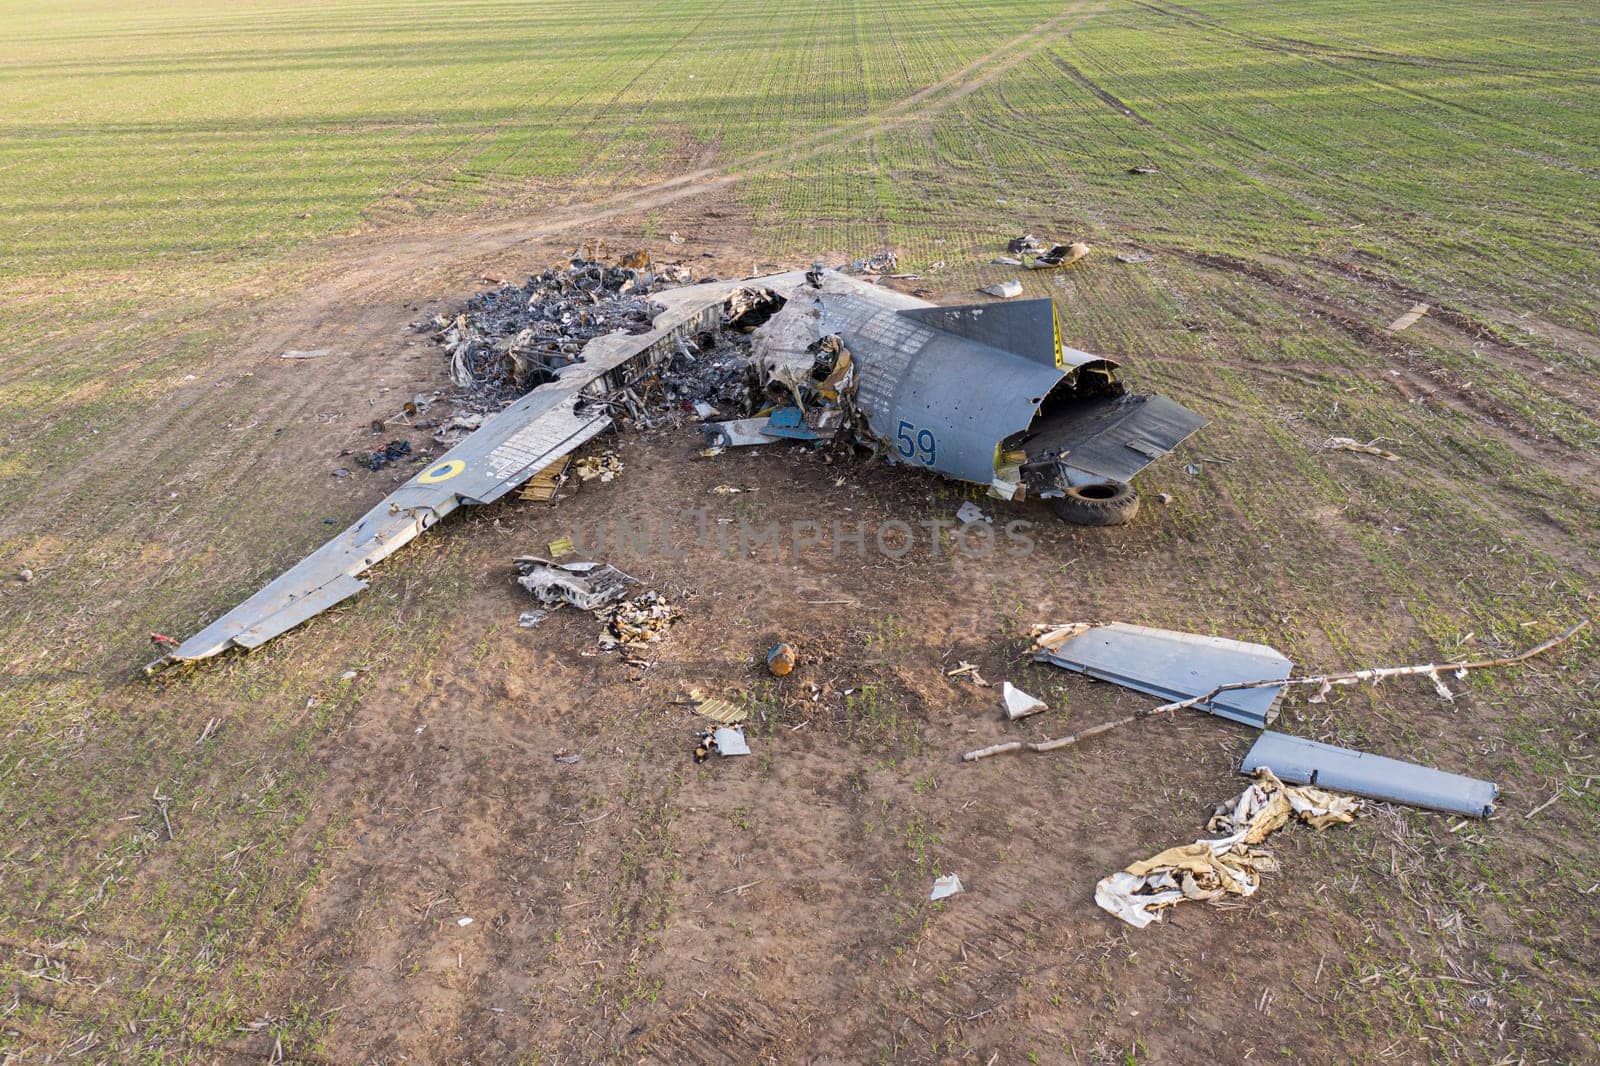 In this picture, an AN-26 aircraft can be seen lying on a field in Ukraine after an accident. The aircraft appears to have suffered significant damage, with parts scattered around the wreckage. The image conveys the severity of the accident and the potential dangers of aviation during the war